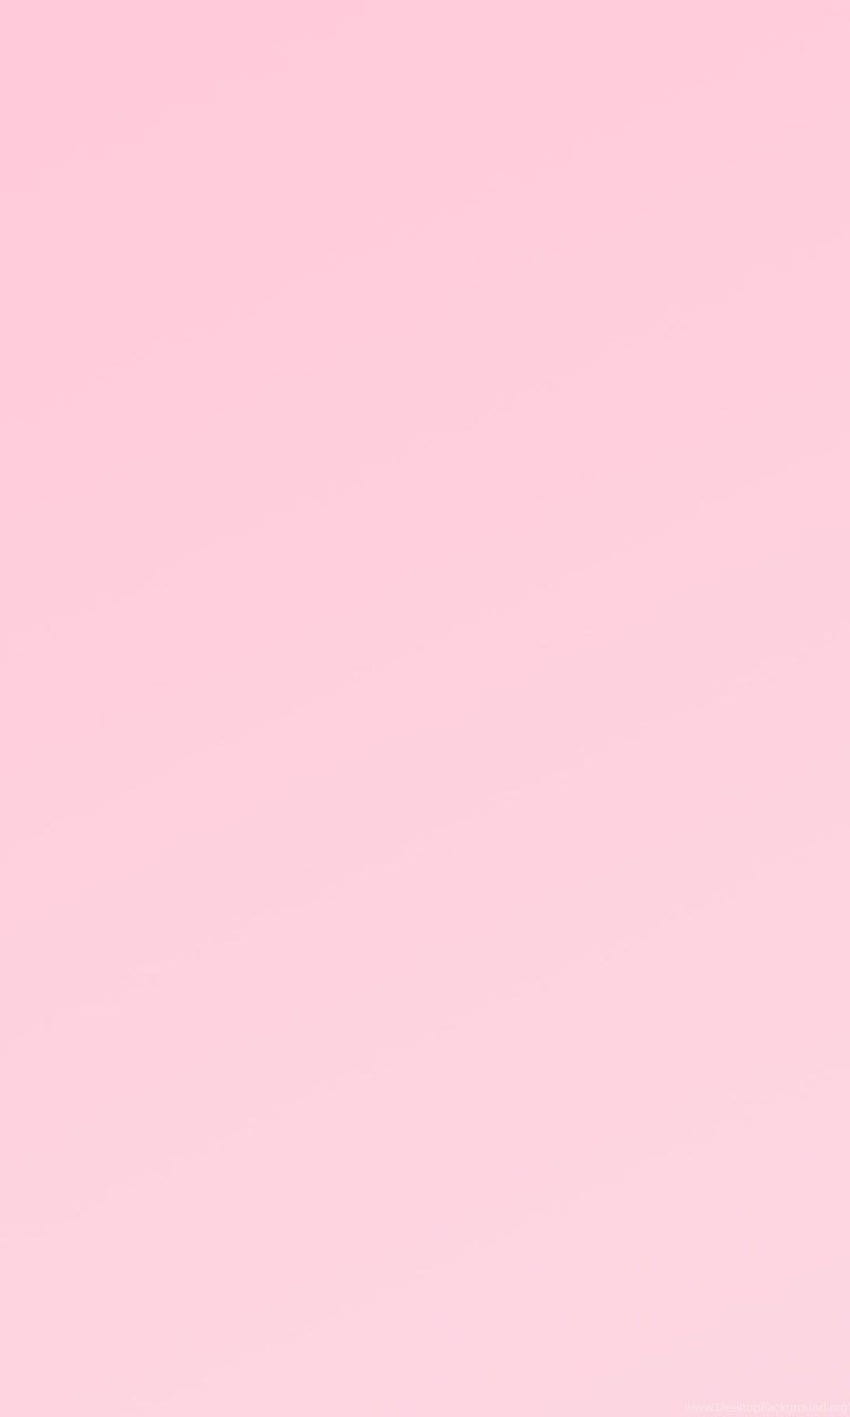 Plain Pink iPhone 5 6 / IPod Background, Solid Color 5 HD phone wallpaper